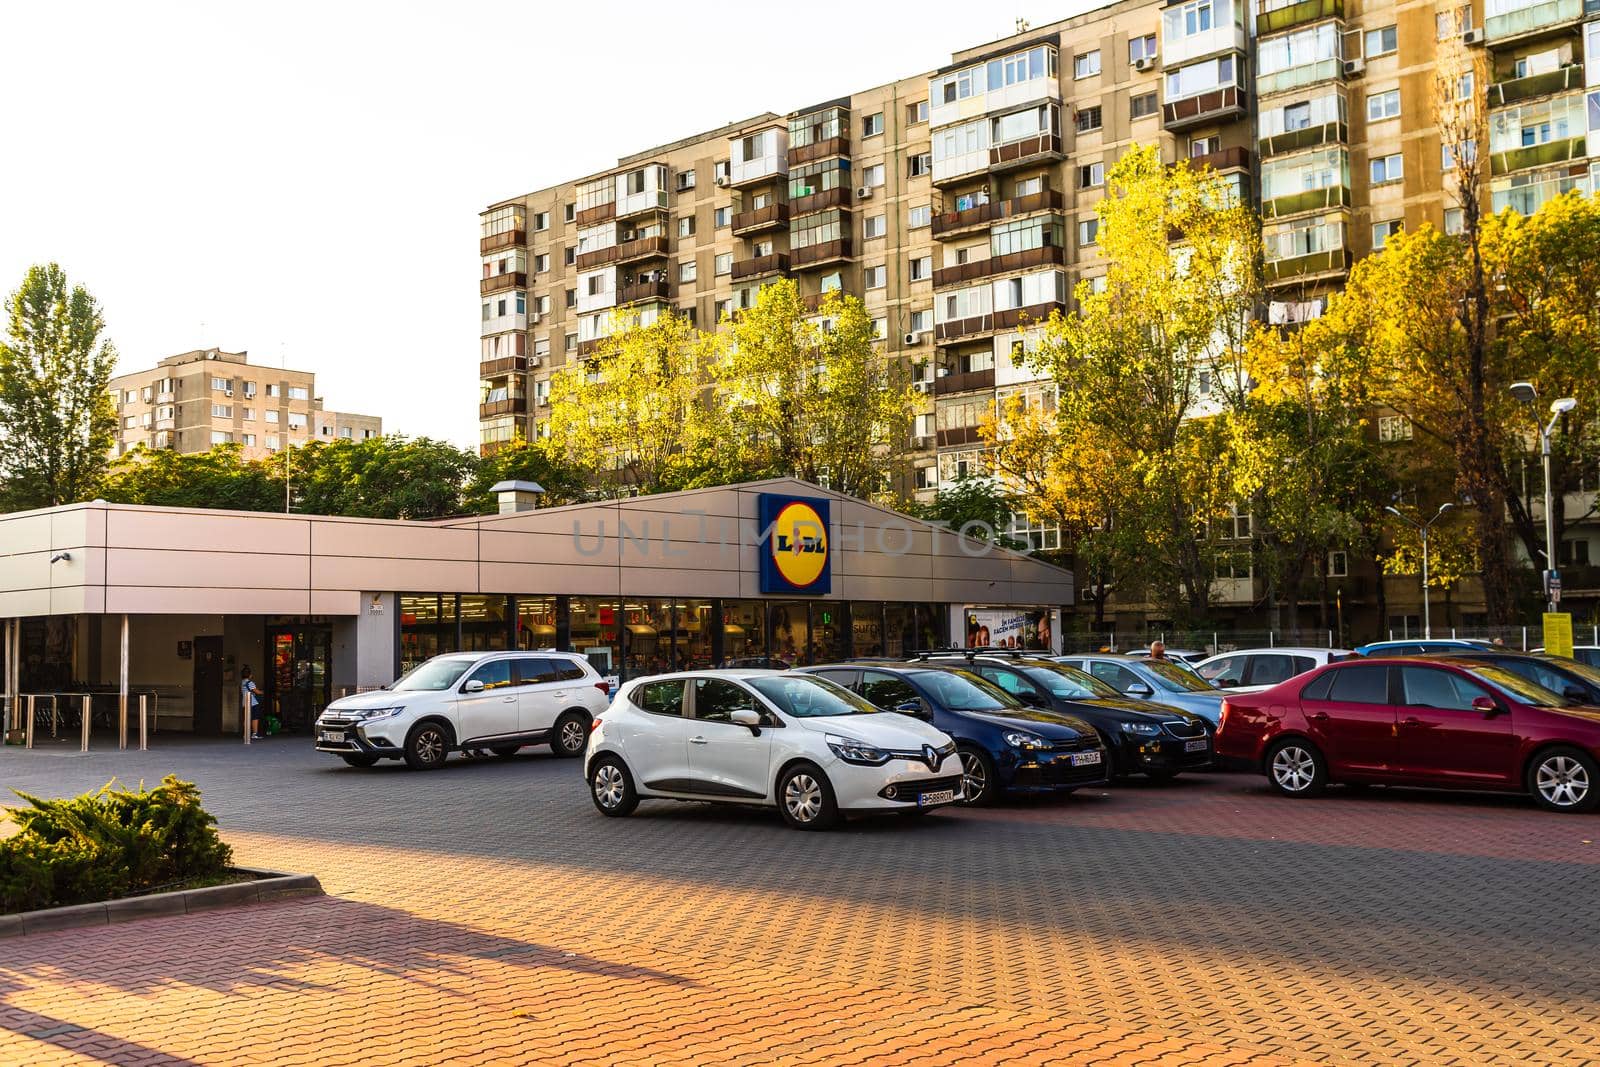 LIDL supermarket and logo. Lidl store in Bucharest, Romania, 2021 by vladispas